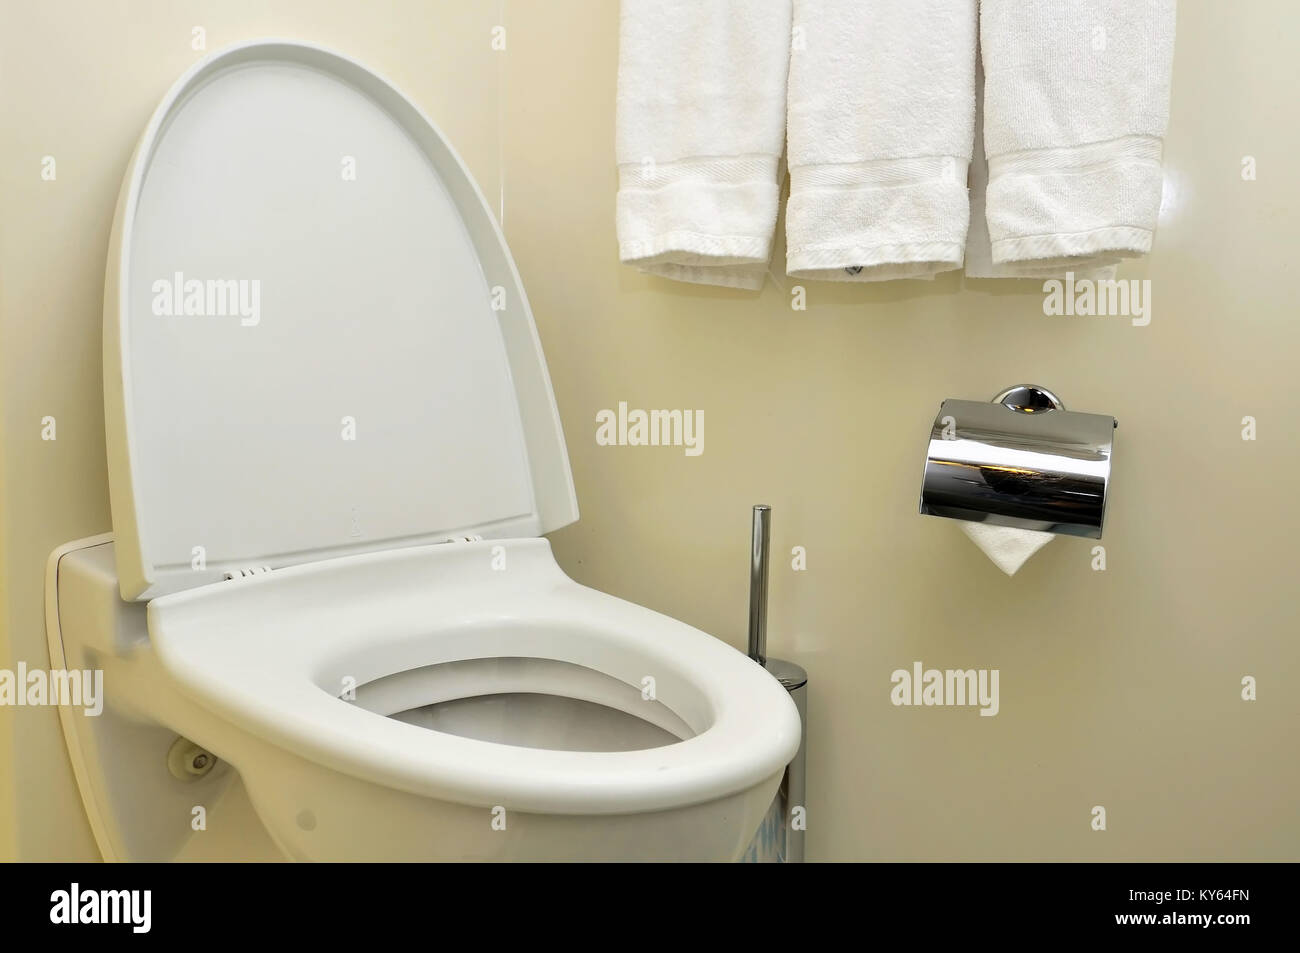 Closeup of generic white toilet seat and bowl. For hygiene and cleanliness concepts. Stock Photo